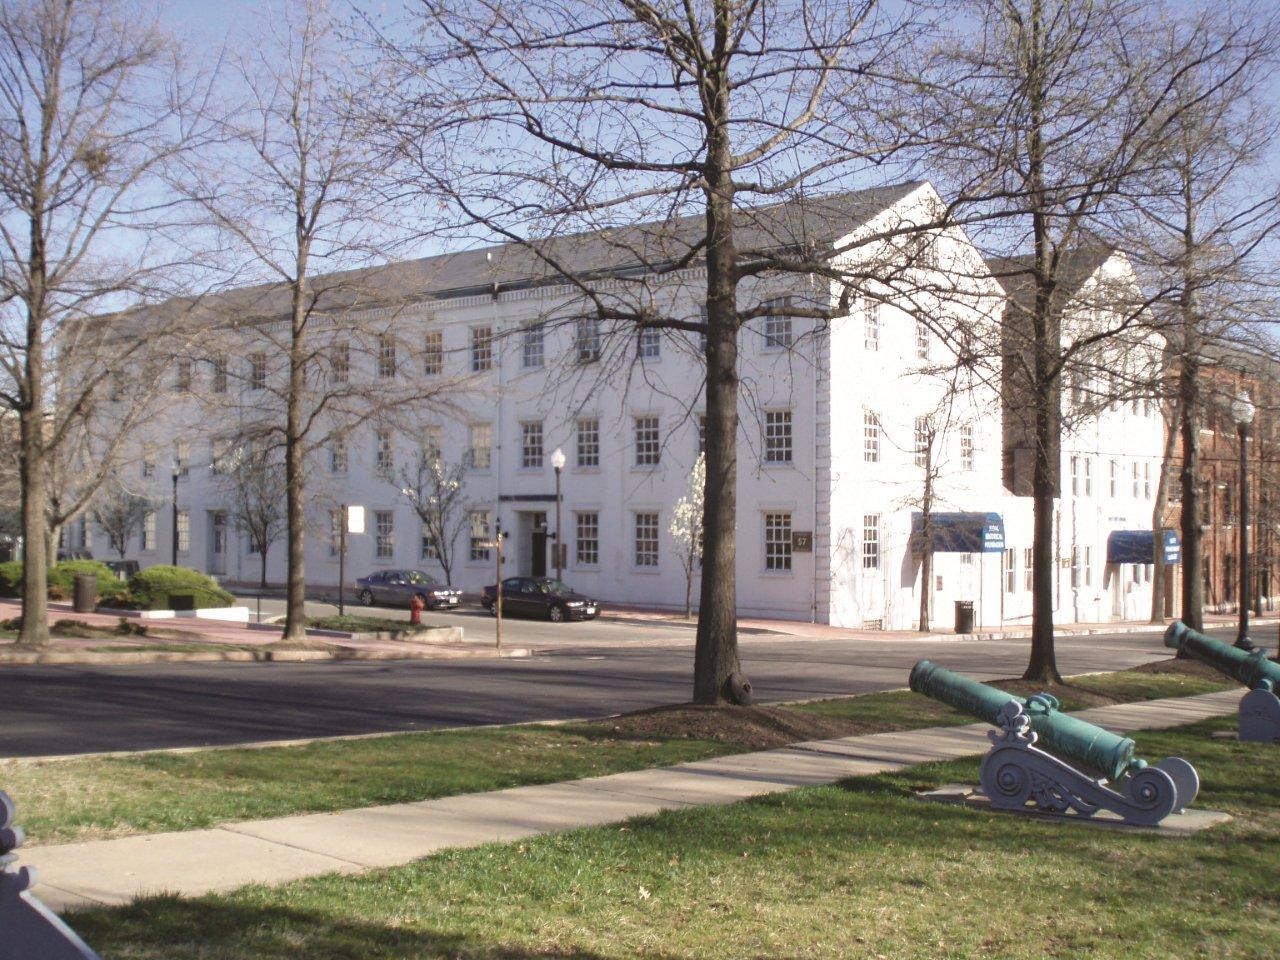 Photograph of the NHHC Building